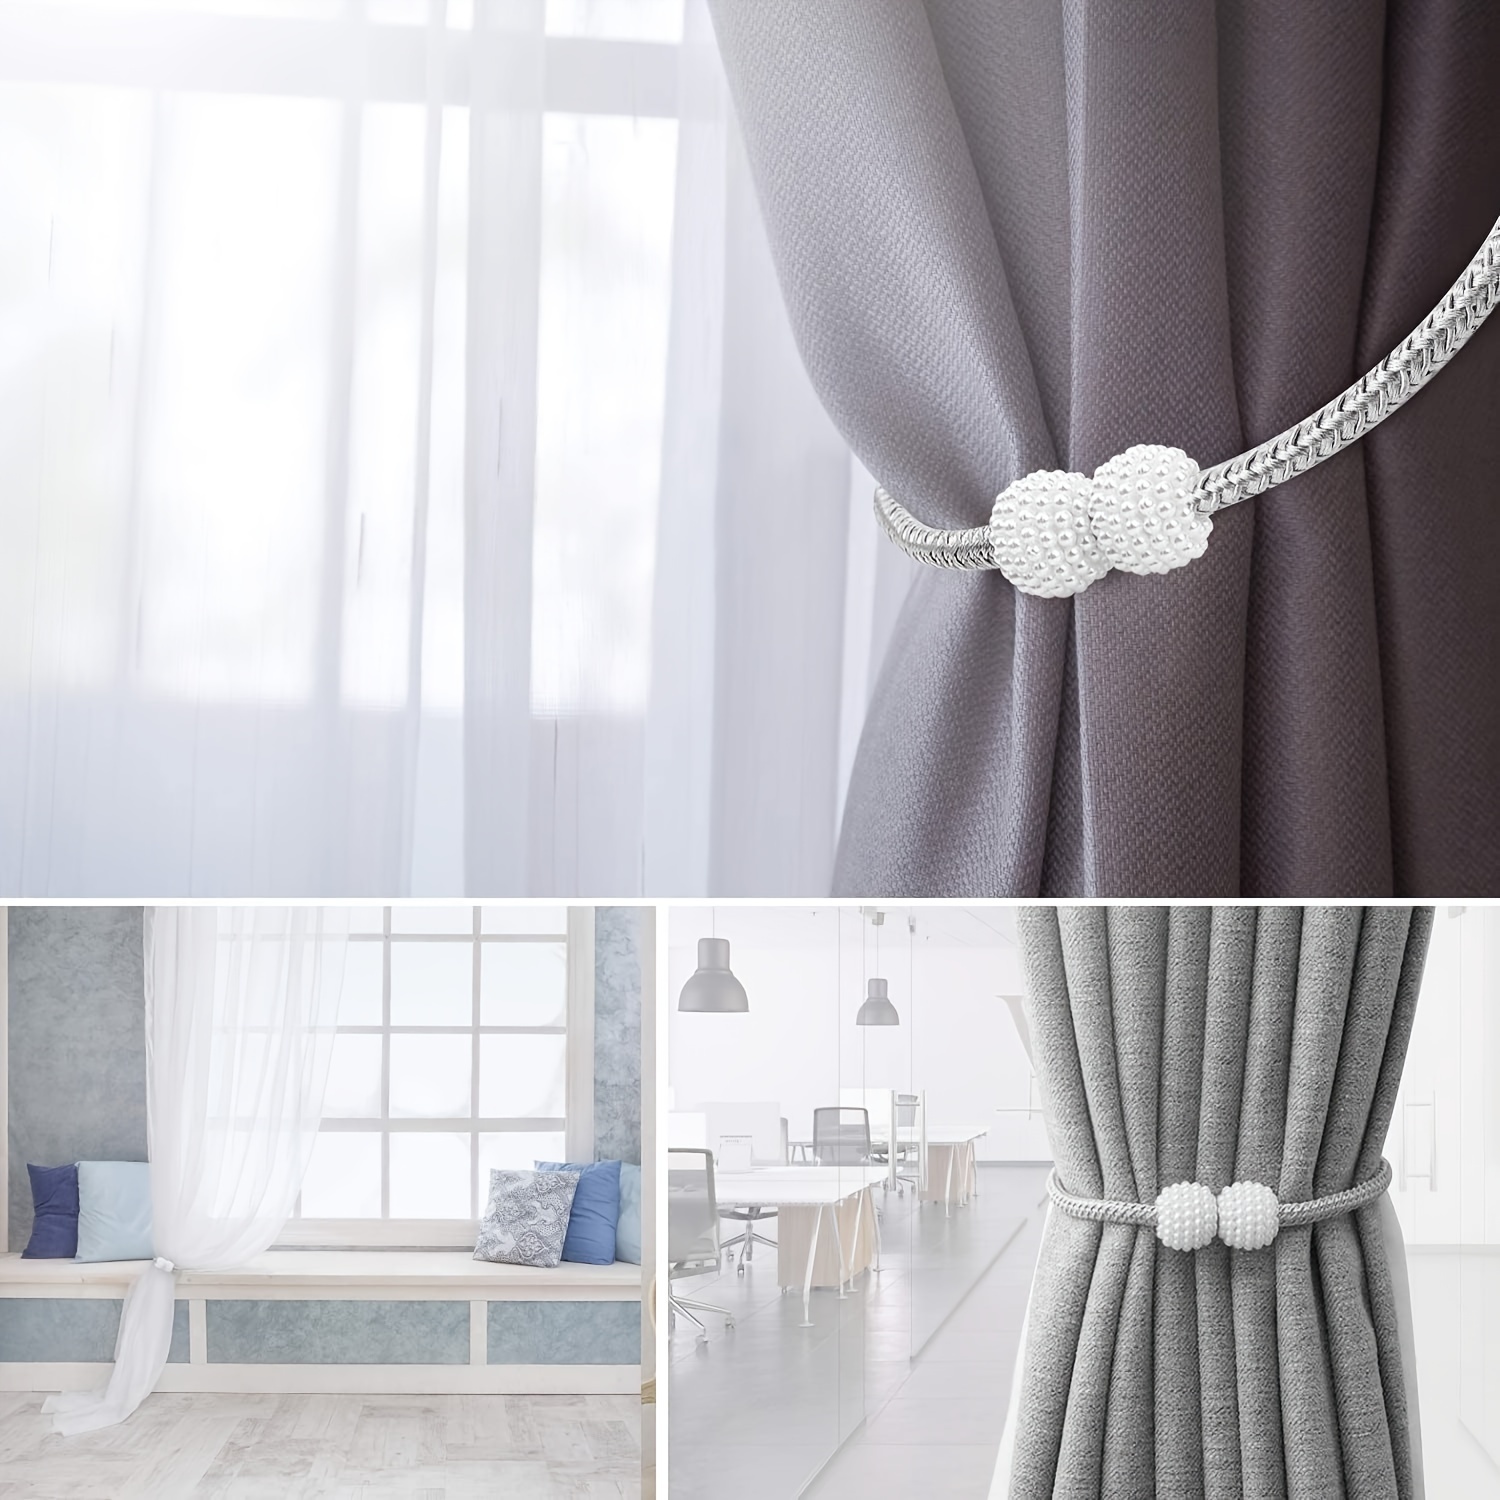 4PCS White Magnetic Curtain Tie Backs Rope Clips Buckle Holder